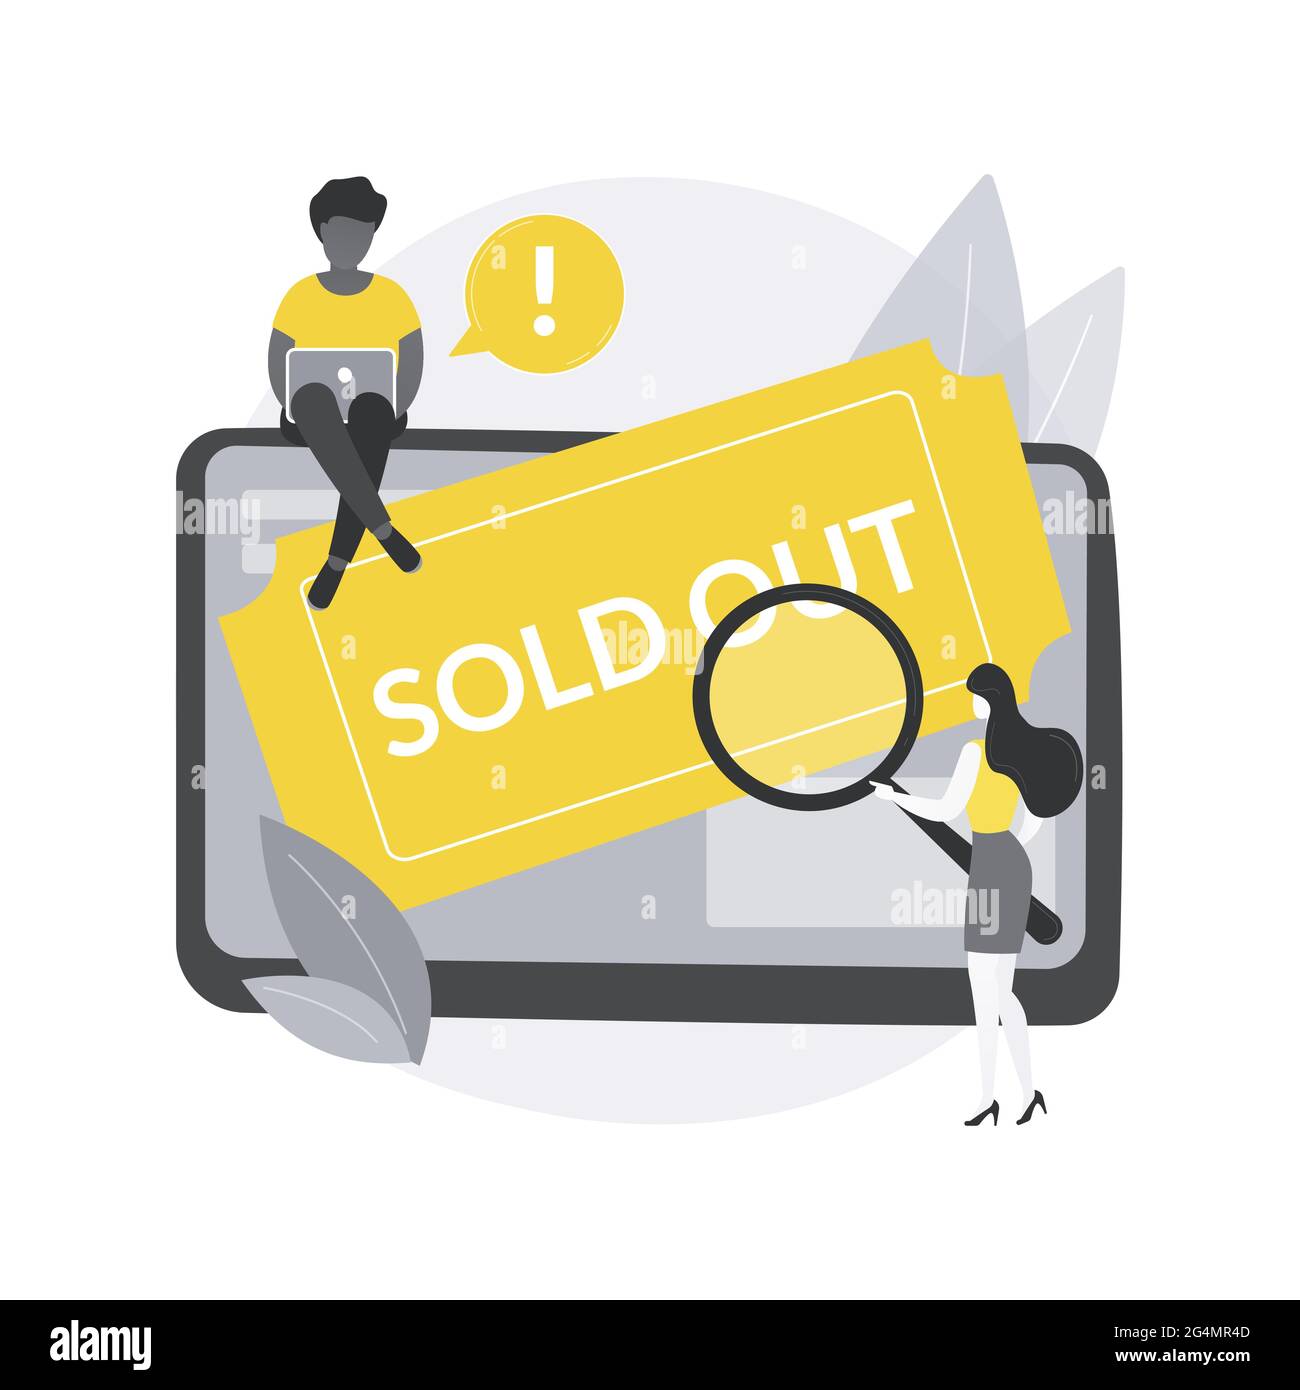 Sold-out event abstract concept vector illustration. Stock Vector